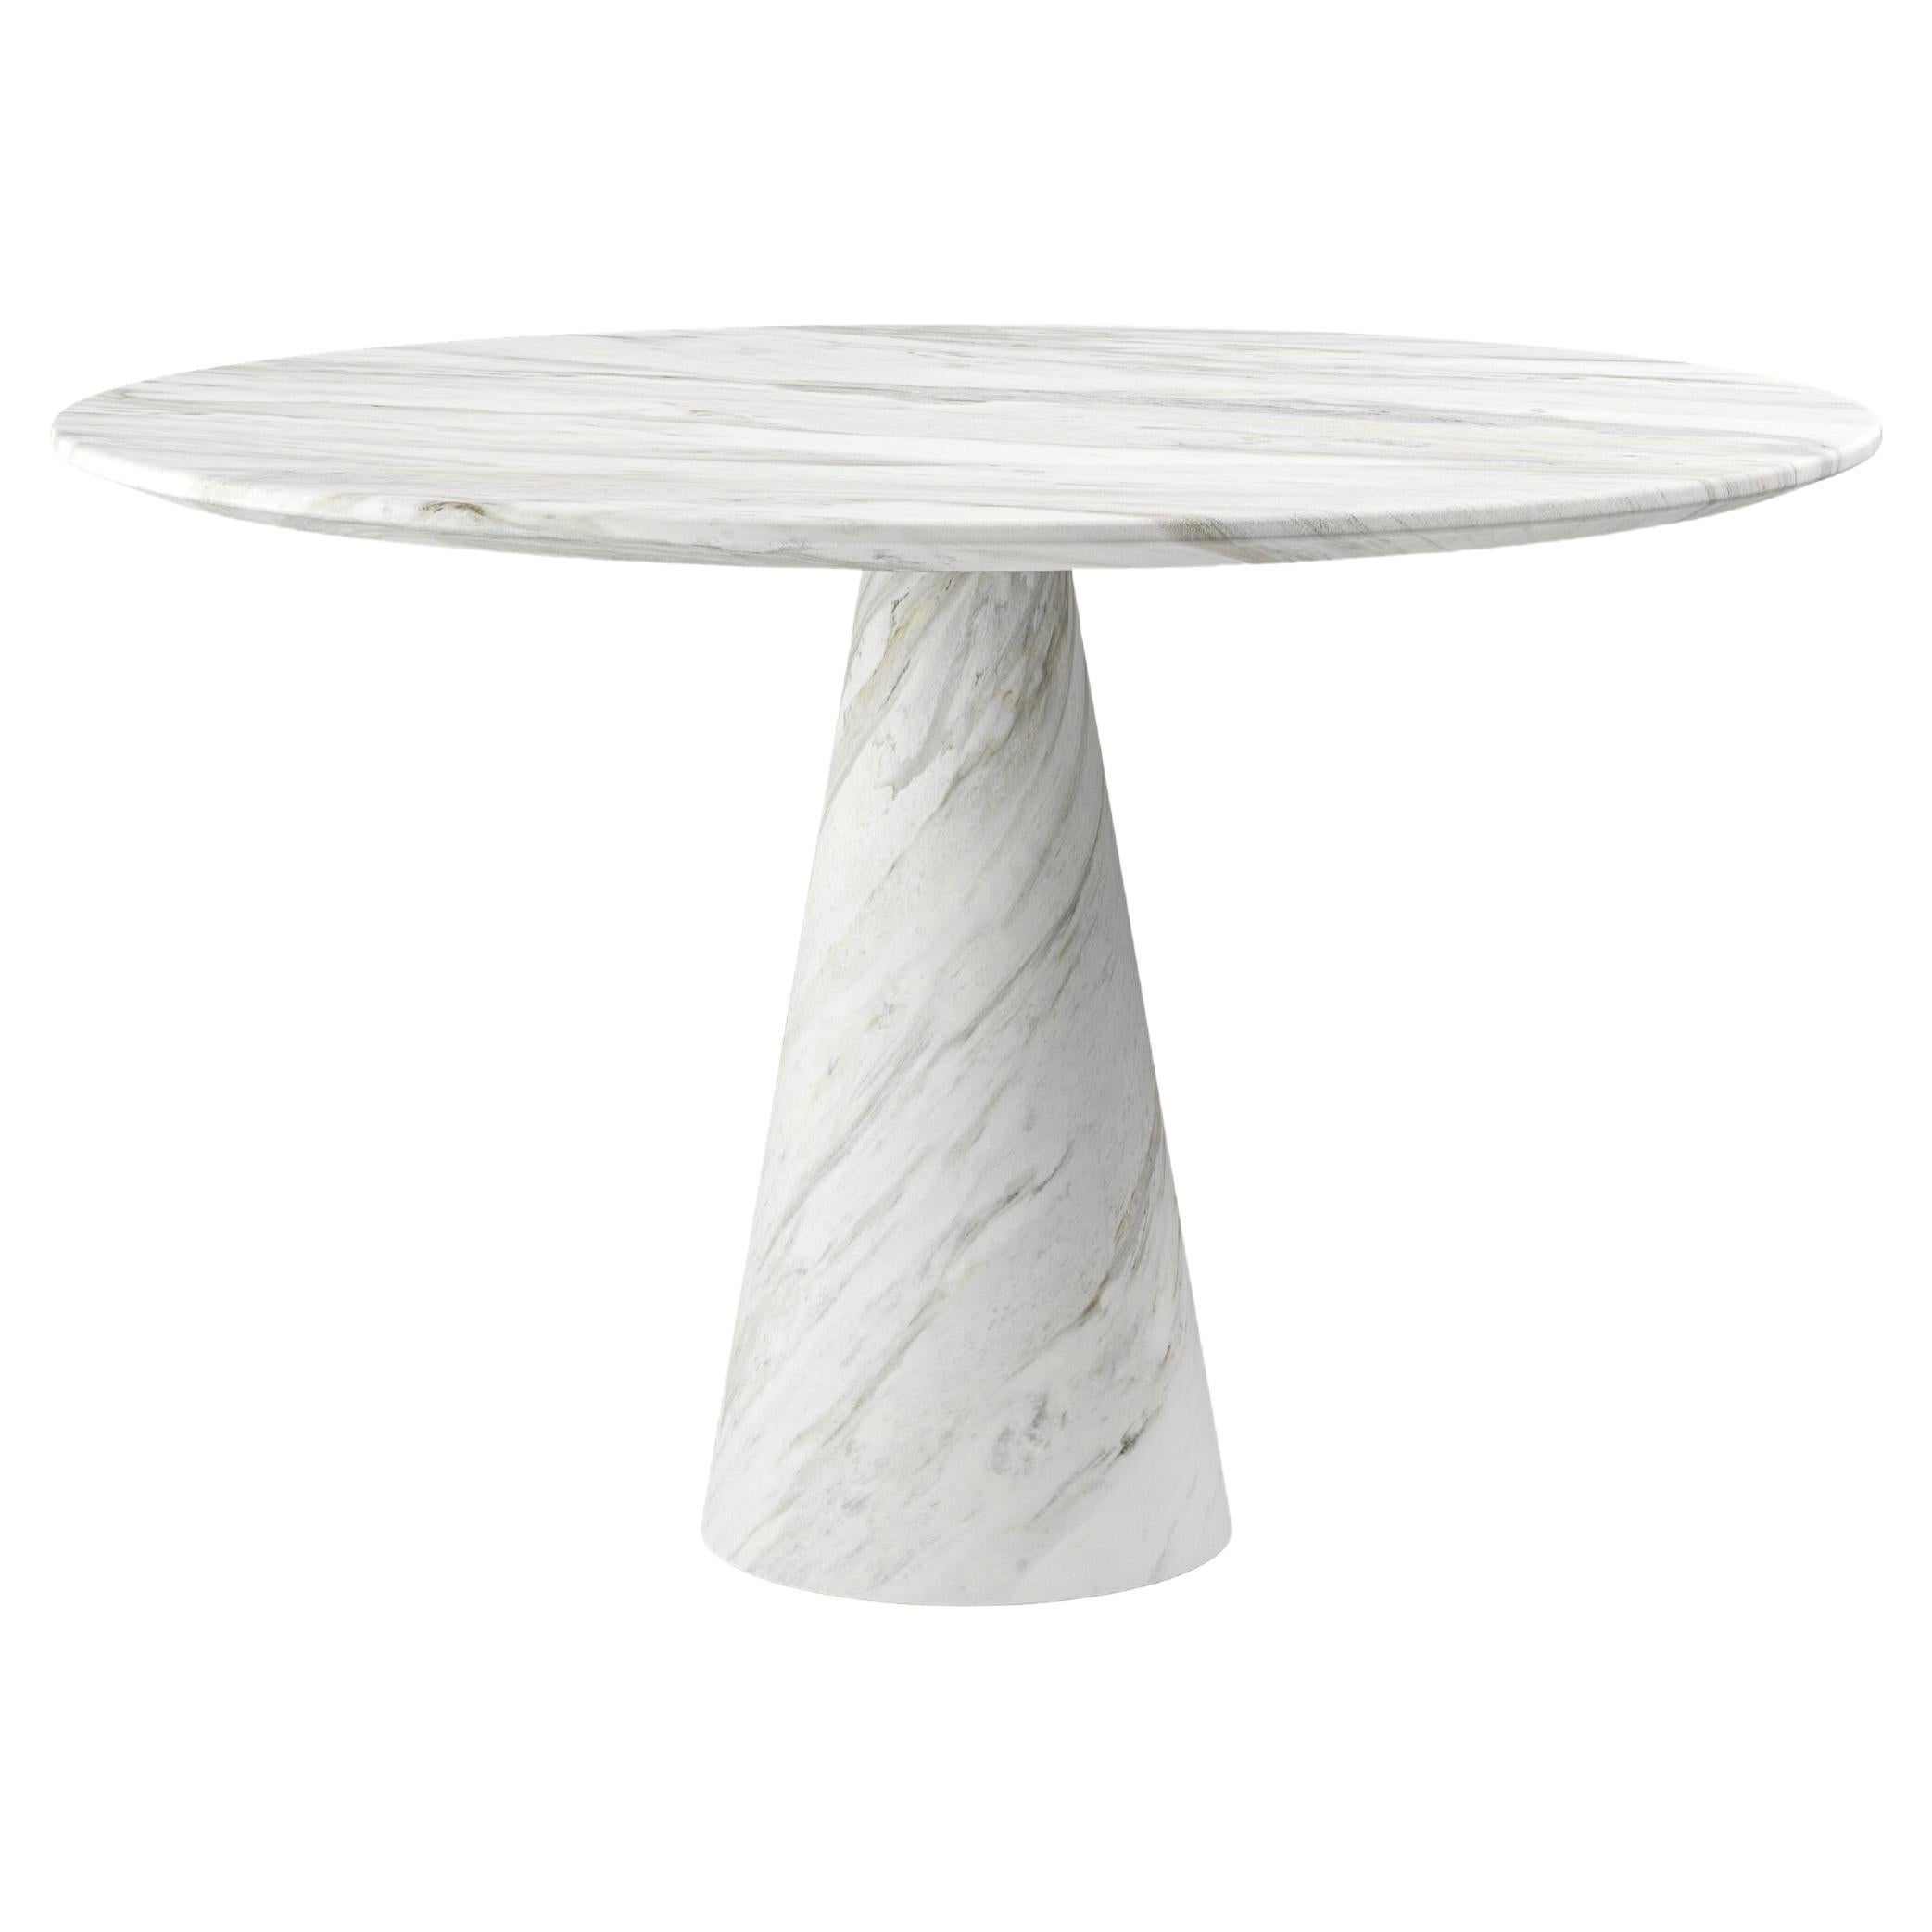 FORM(LA) Cono Round Dining Table 42”L x 42”W x 30”H Volakas White Marble For Sale